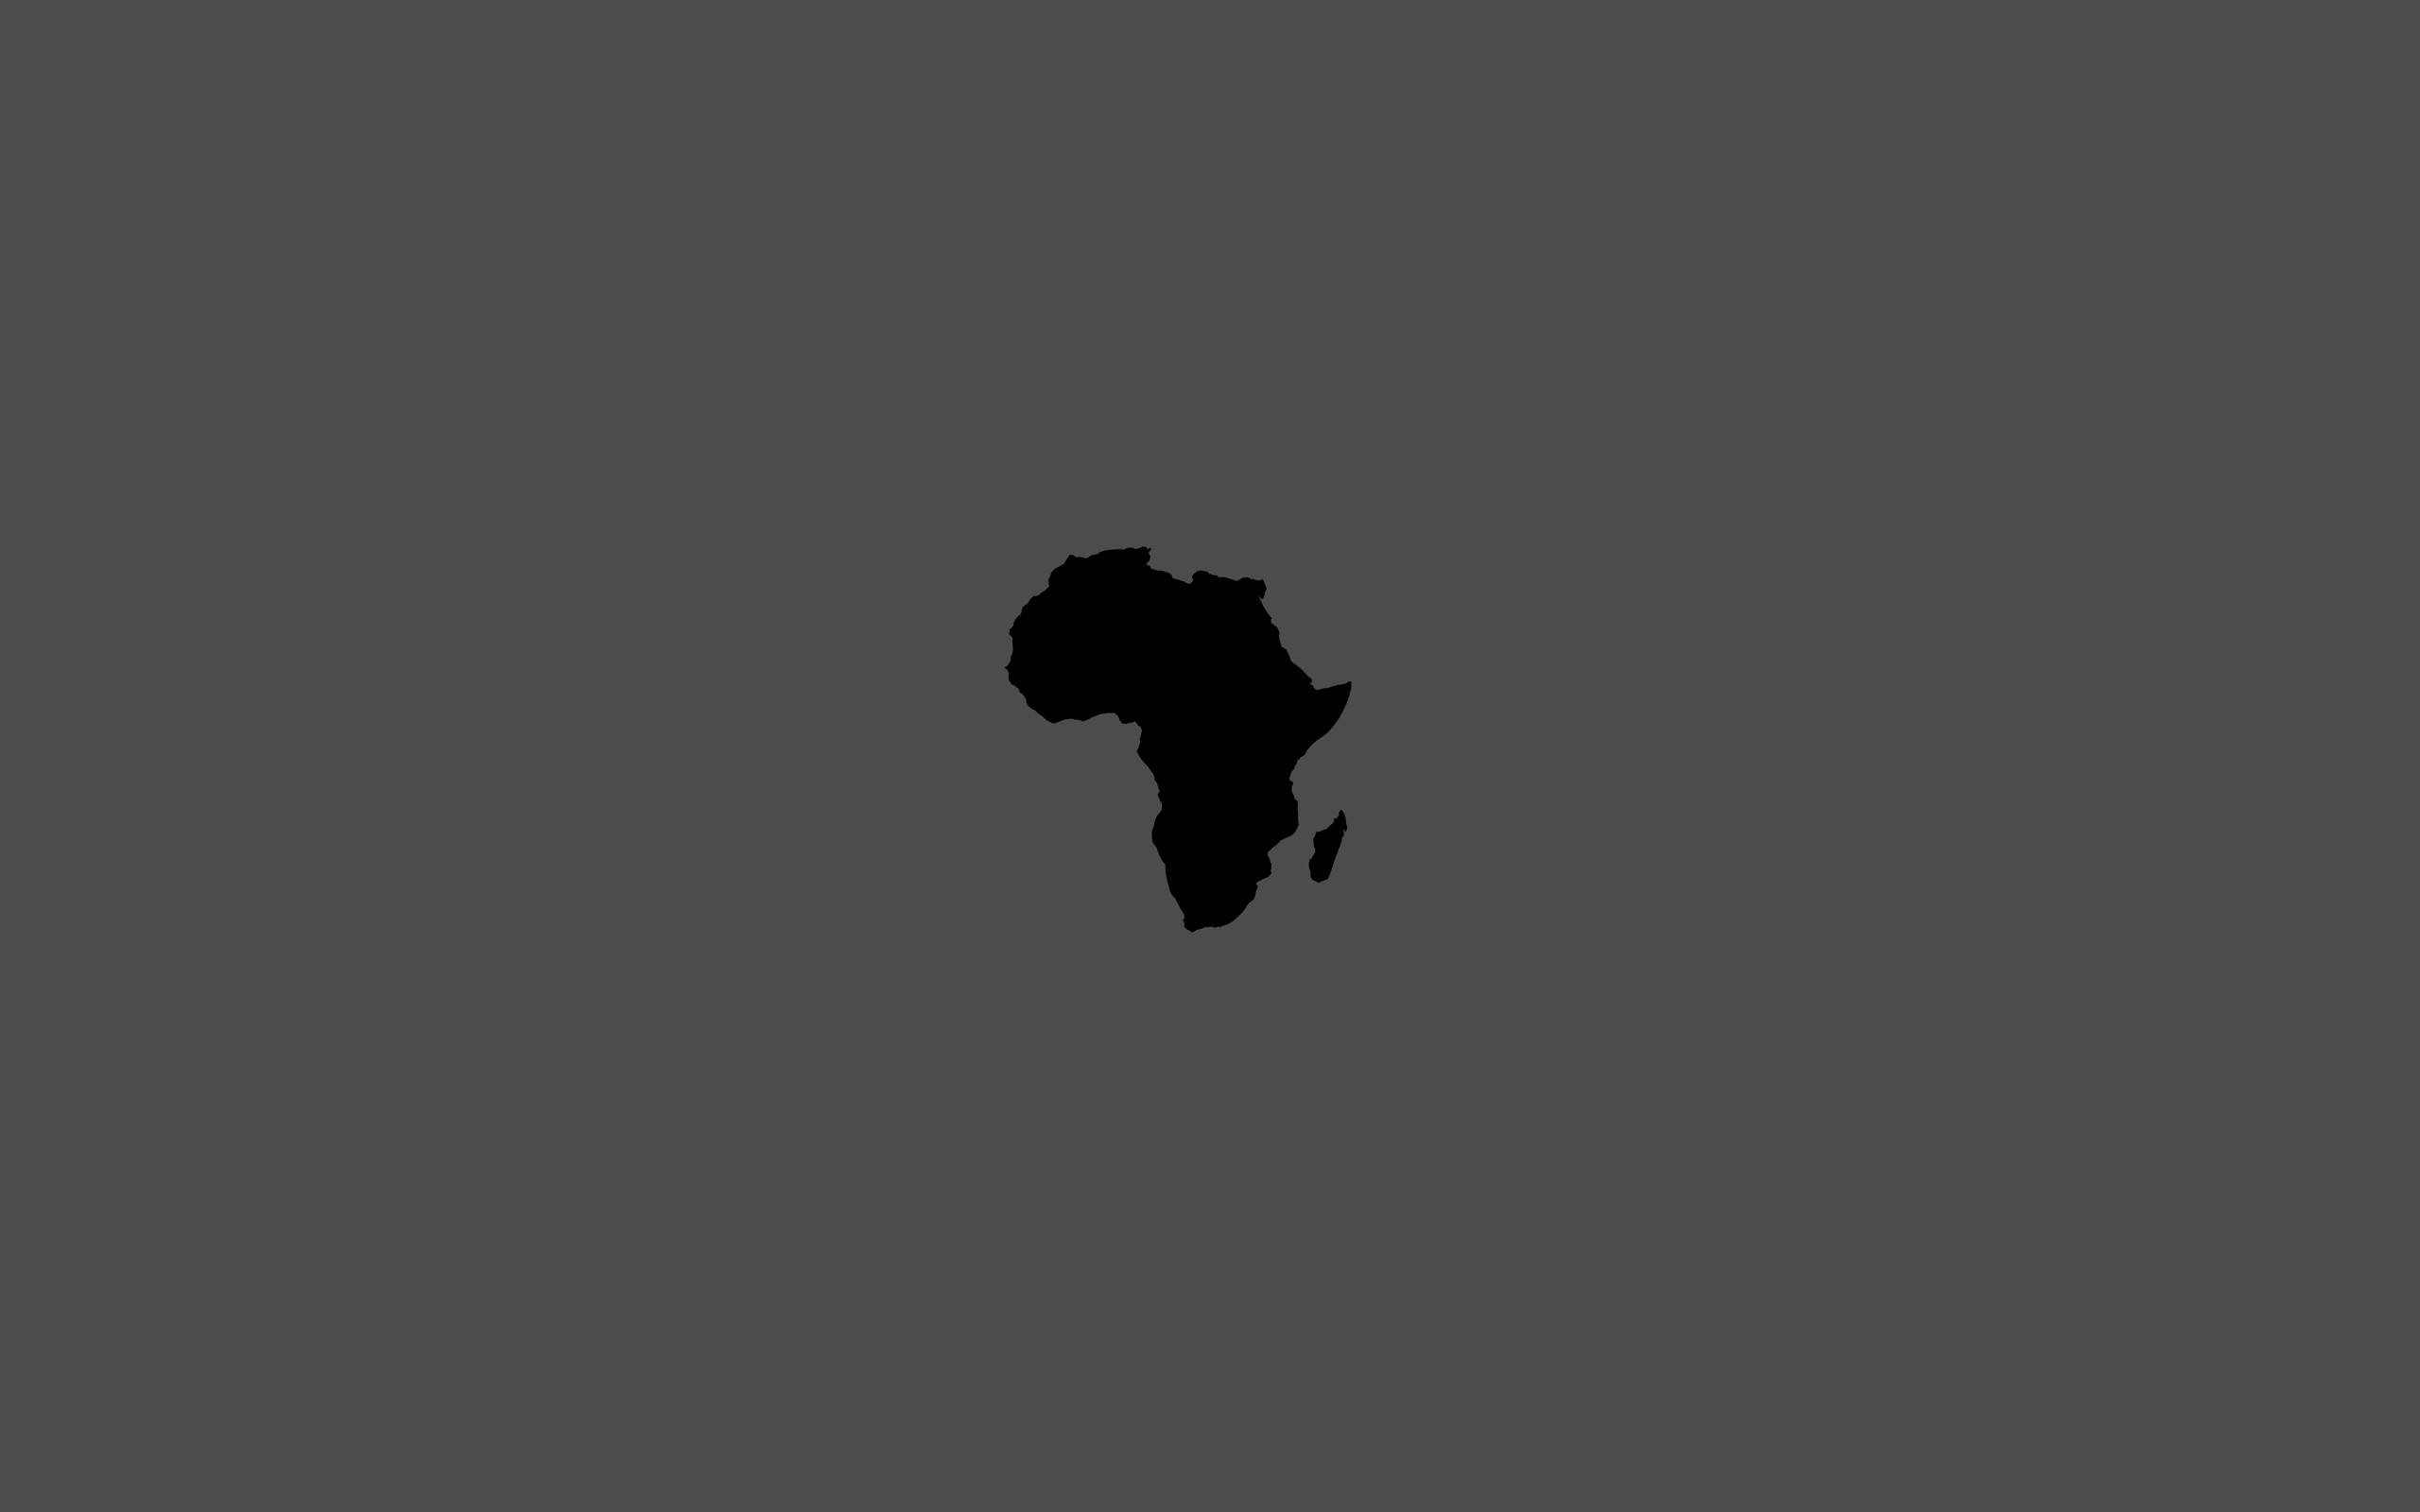 2560x1600 ... simple desktop wallpapers of the African continent in different colors.  Download them by a right click and „save as“. They are all vector graphics  with ...